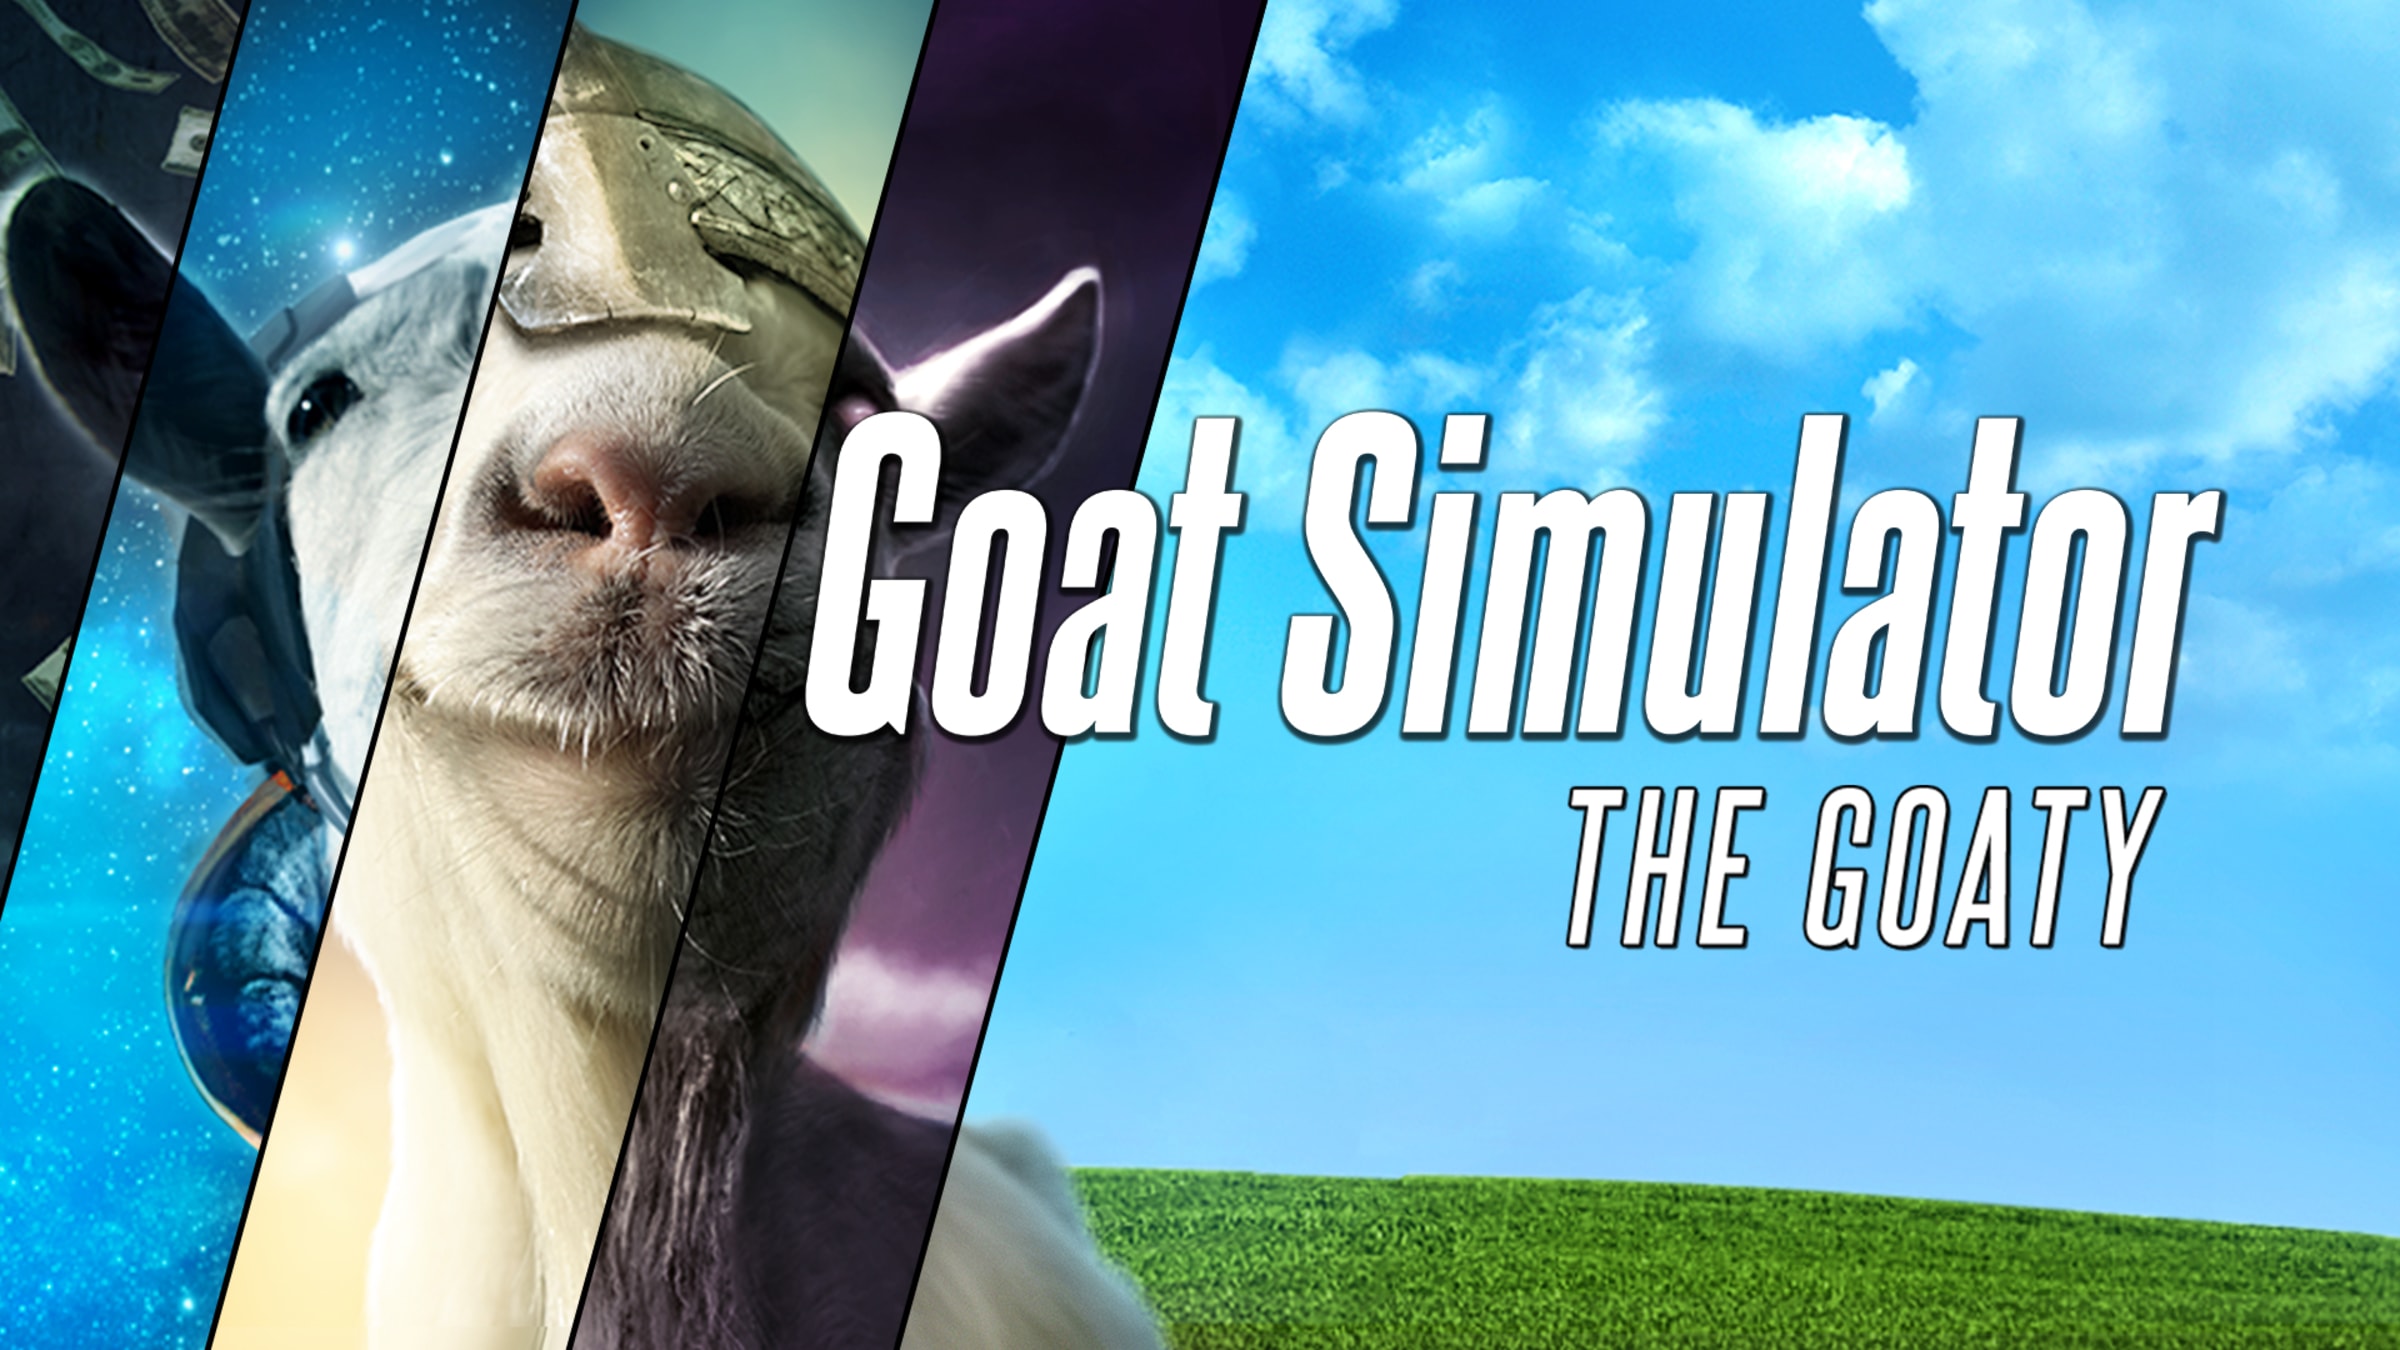 Goat Simulator: The GOATY for Nintendo Switch - Nintendo Official Site